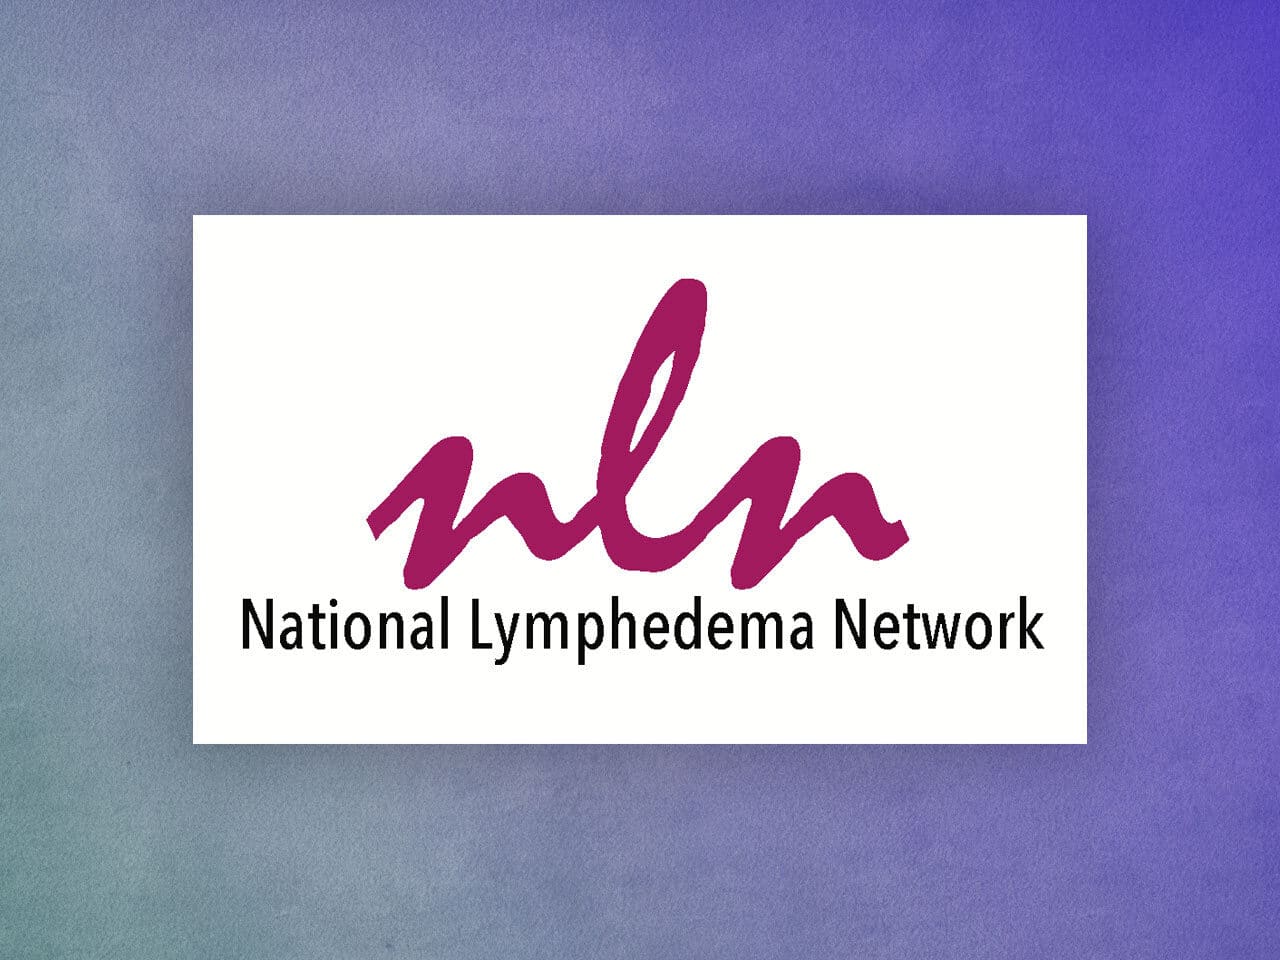 AIROS Medical to Sponsor, Present at the 2020 National Lymphedema Network Virtual Event in October